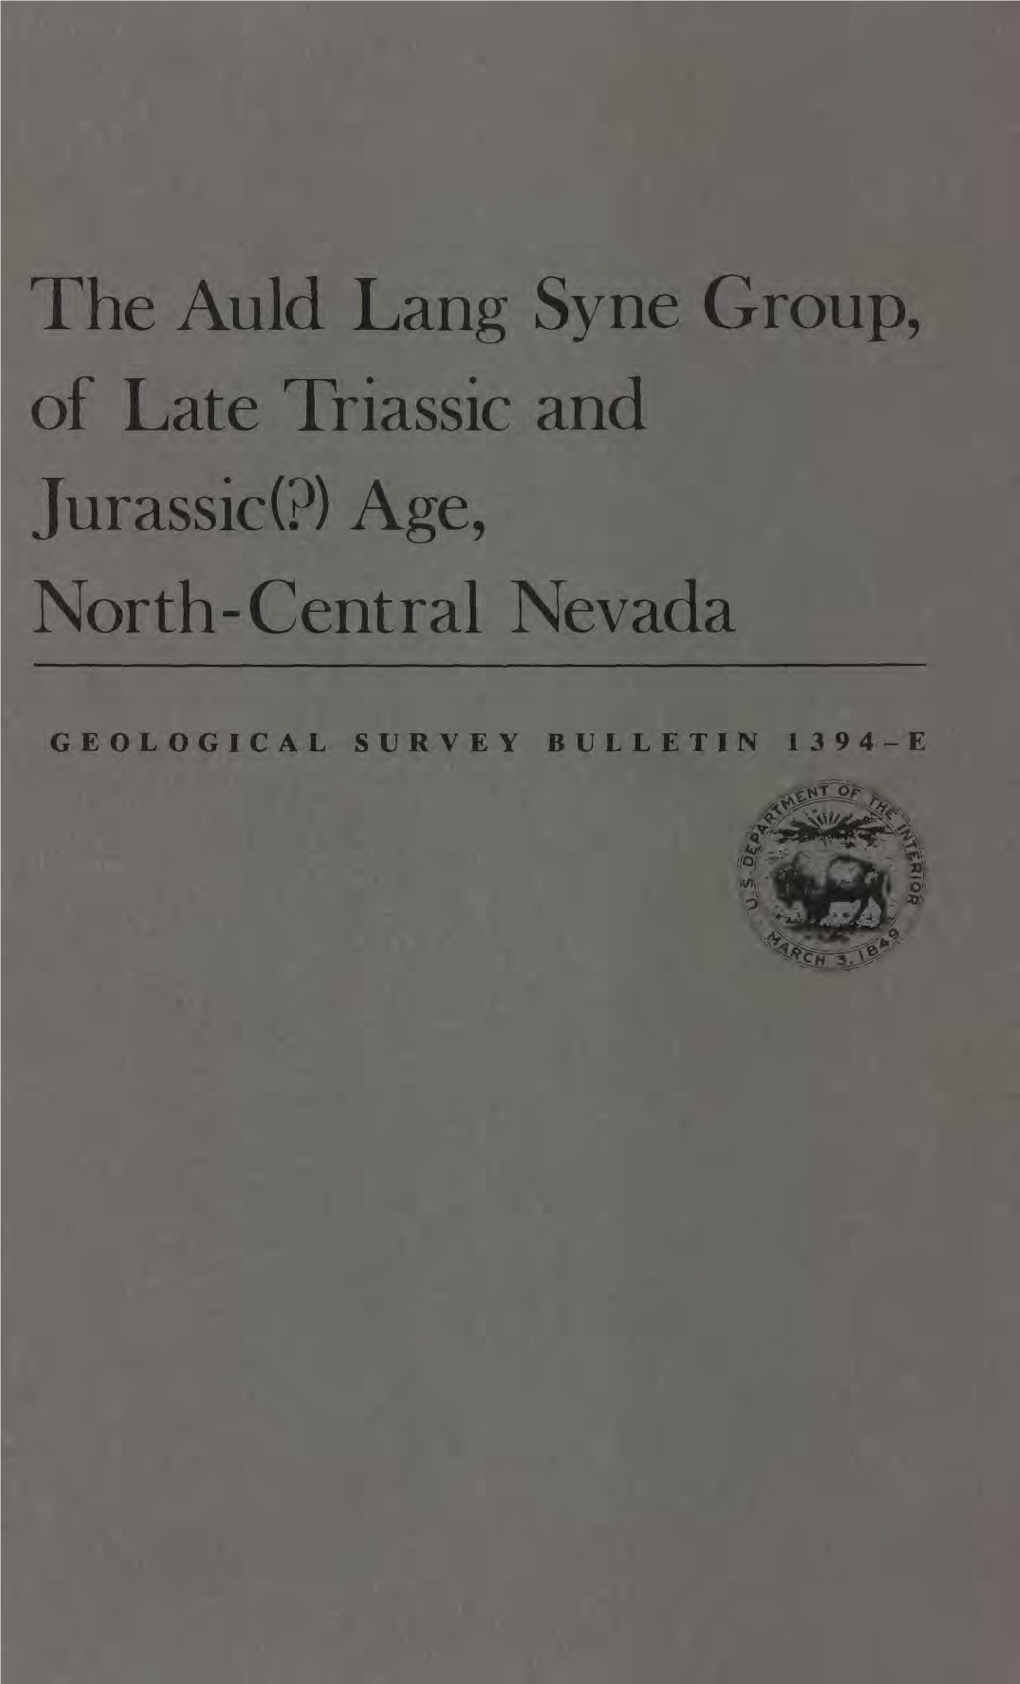 The Auld Lang Syne Group, of Late Triassic and Jurassic(P) Age, North-Central Nevada